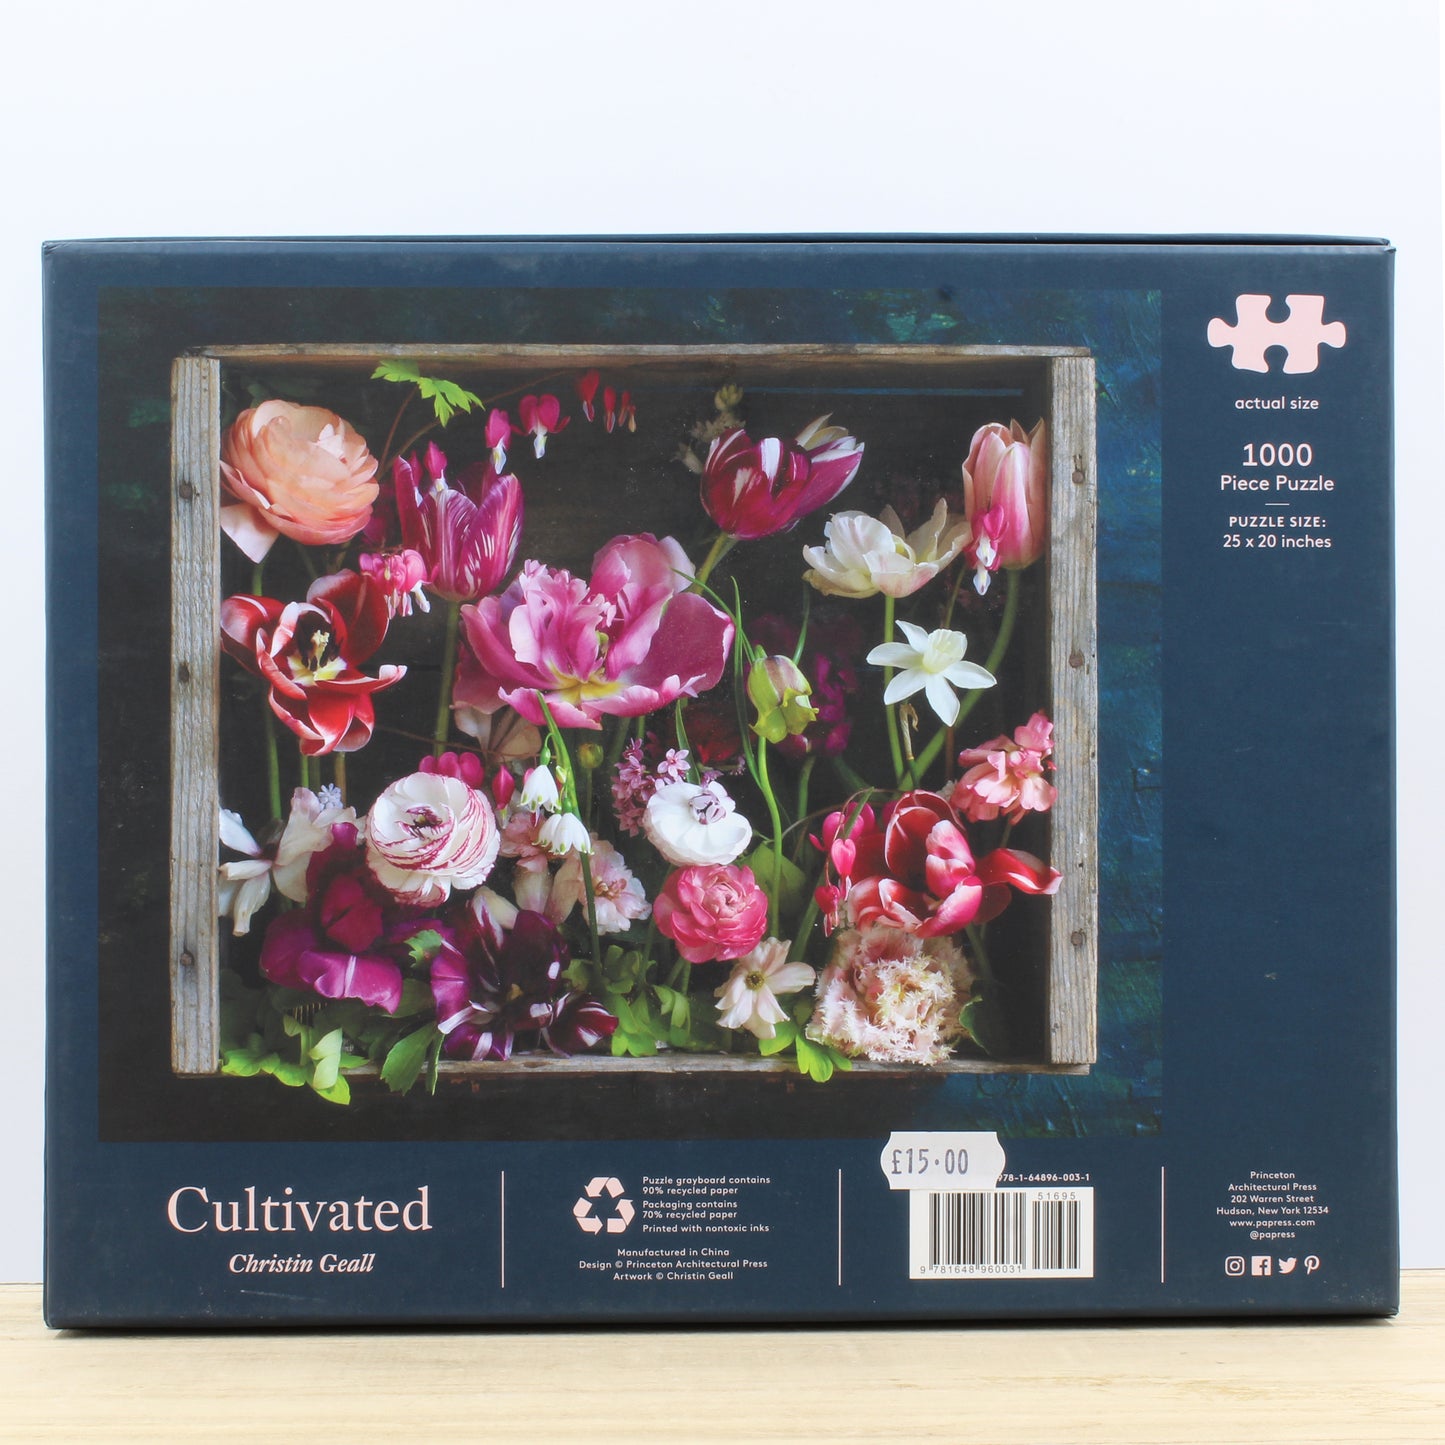 Cultivated: 1000 Piece Jigsaw Puzzle